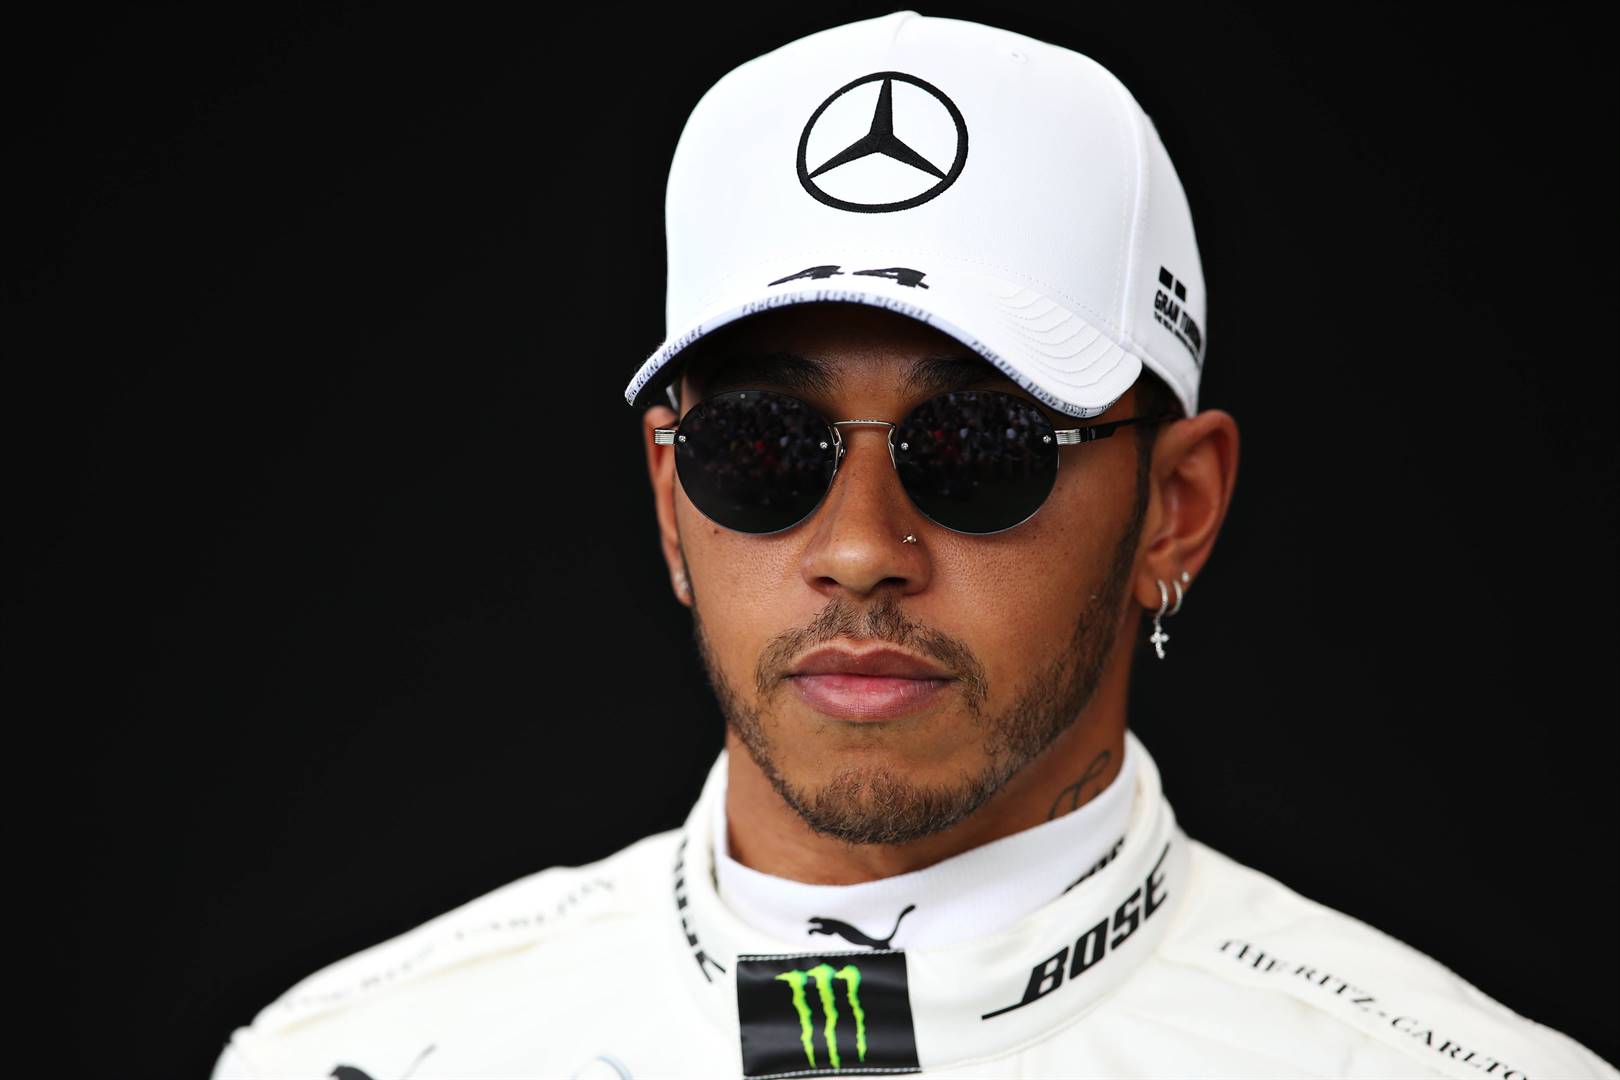 Lewis Hamilton is self-isolating after coming in contact with Idris Elba, who tested positive for Covid-19. Picture: Charles Coates / Getty Images